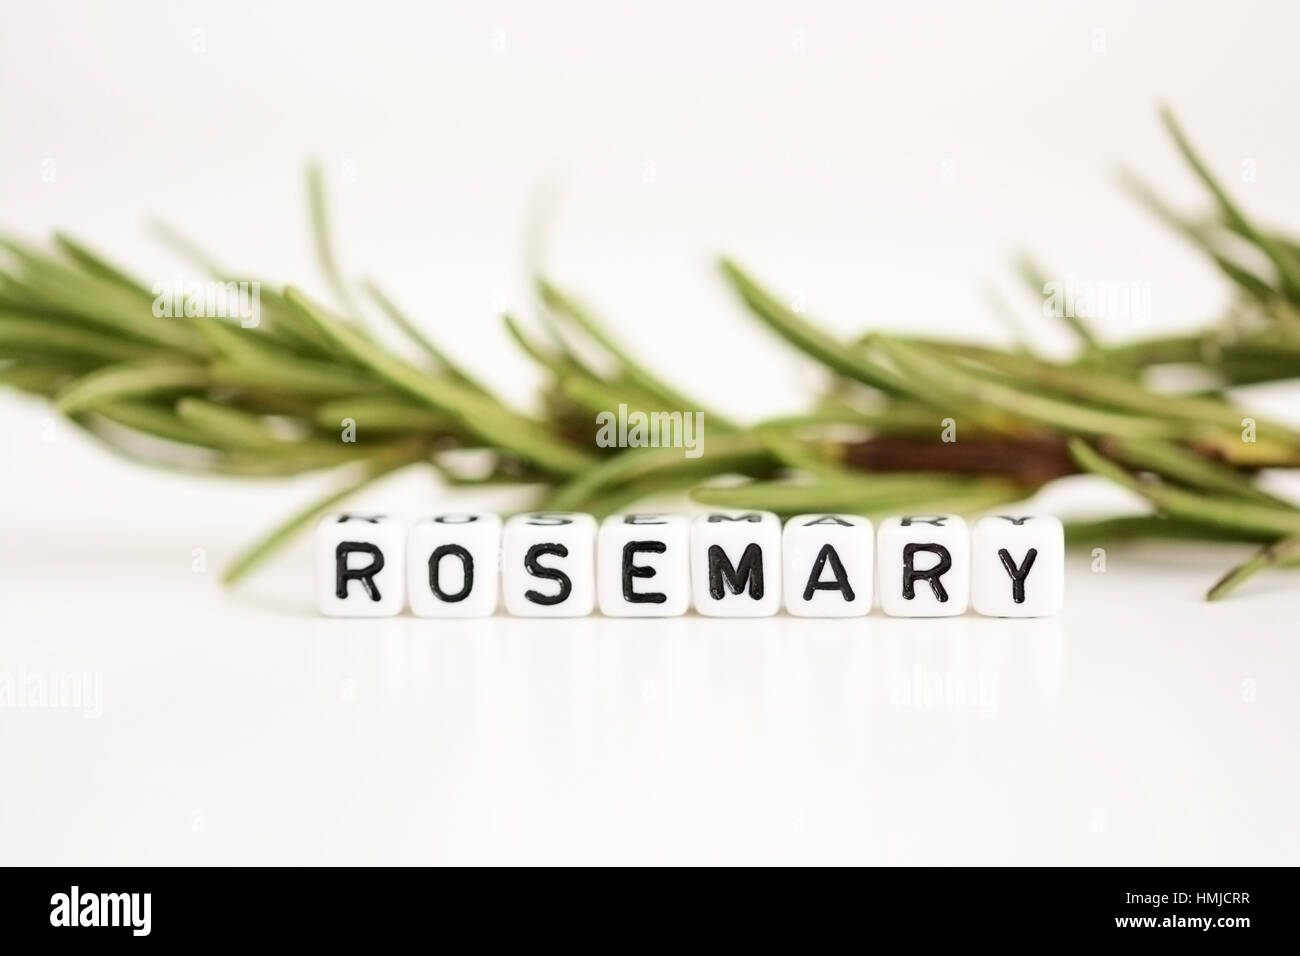 Blurred branch of rosemary in the background with close-up on plastic letter beads spelling “rosemary” Stock Photo